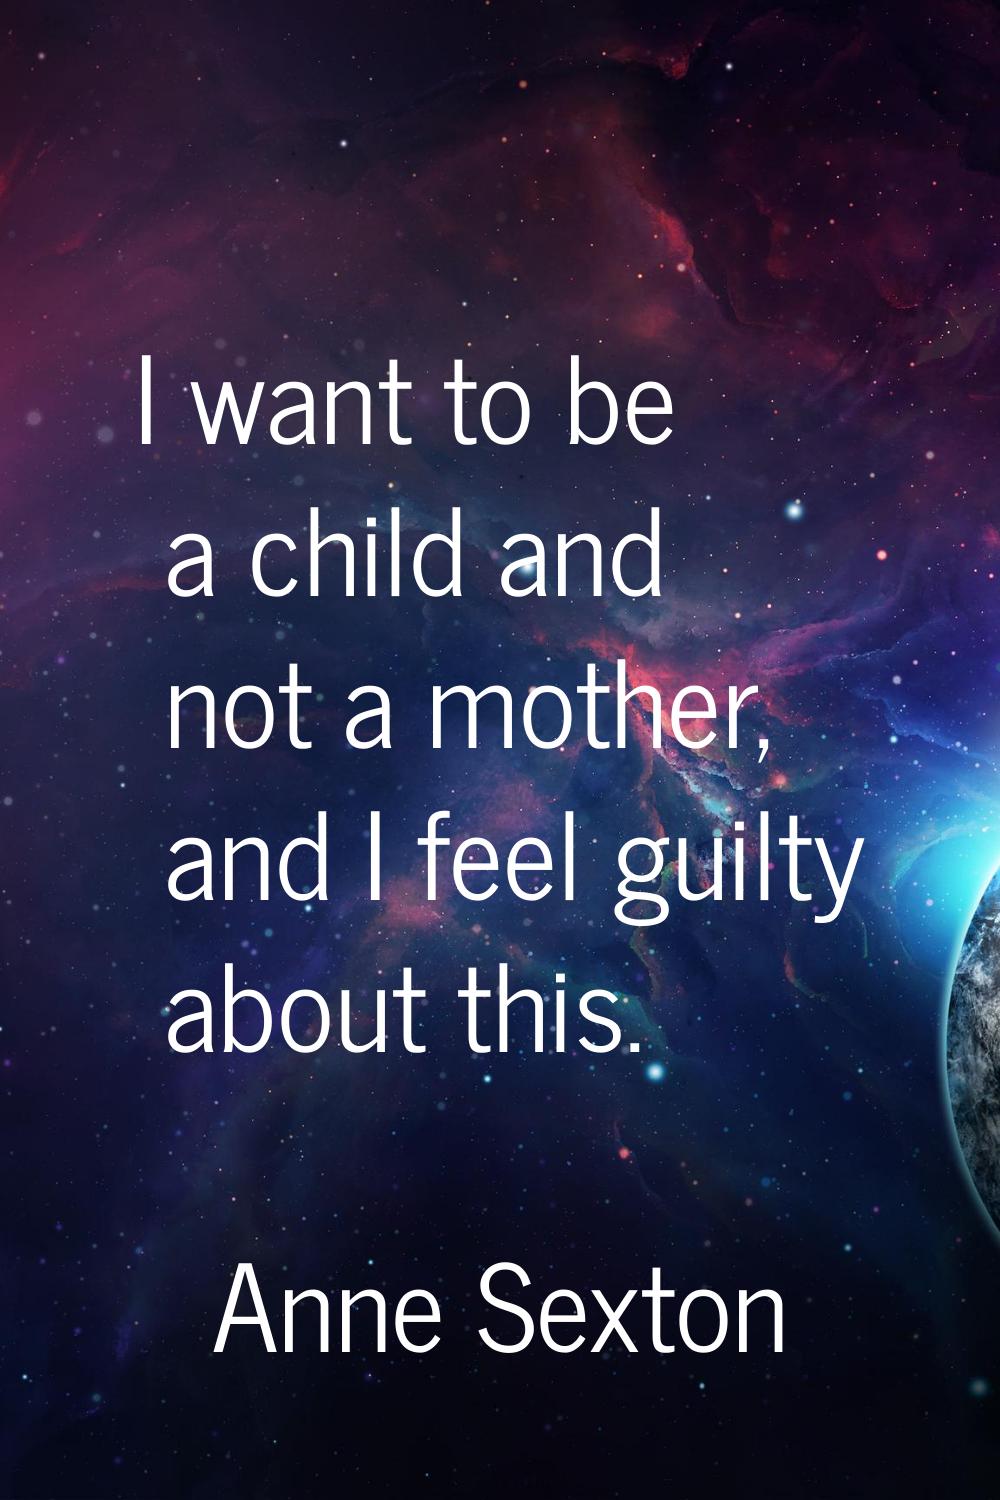 I want to be a child and not a mother, and I feel guilty about this.